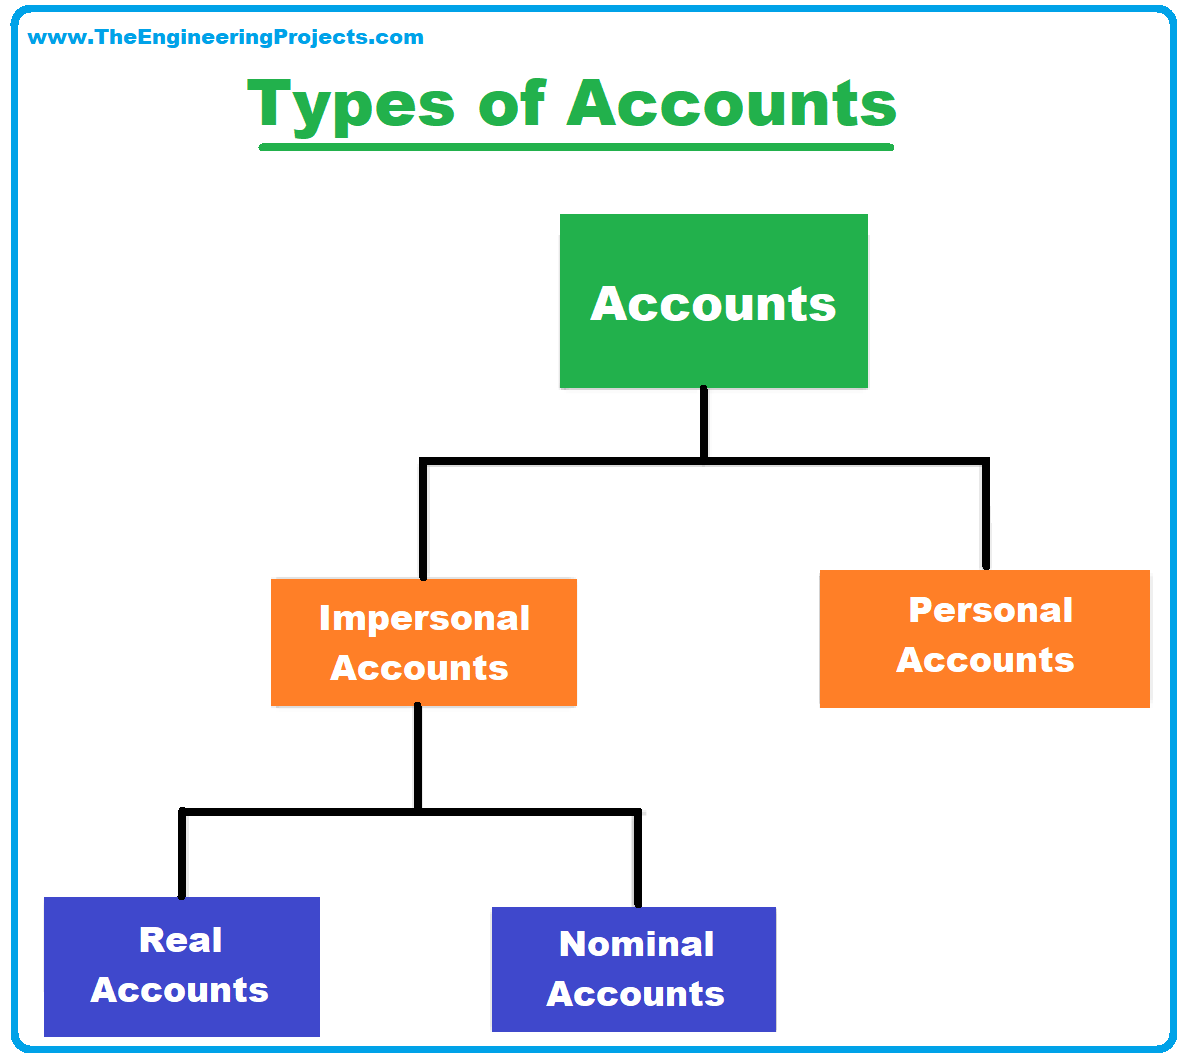 Ethereum Accounts, ethereum system, ethereum blockchain, Types of Accounts, Externally Owned Accounts, Contract Accounts, Fields of an Ethereum Account